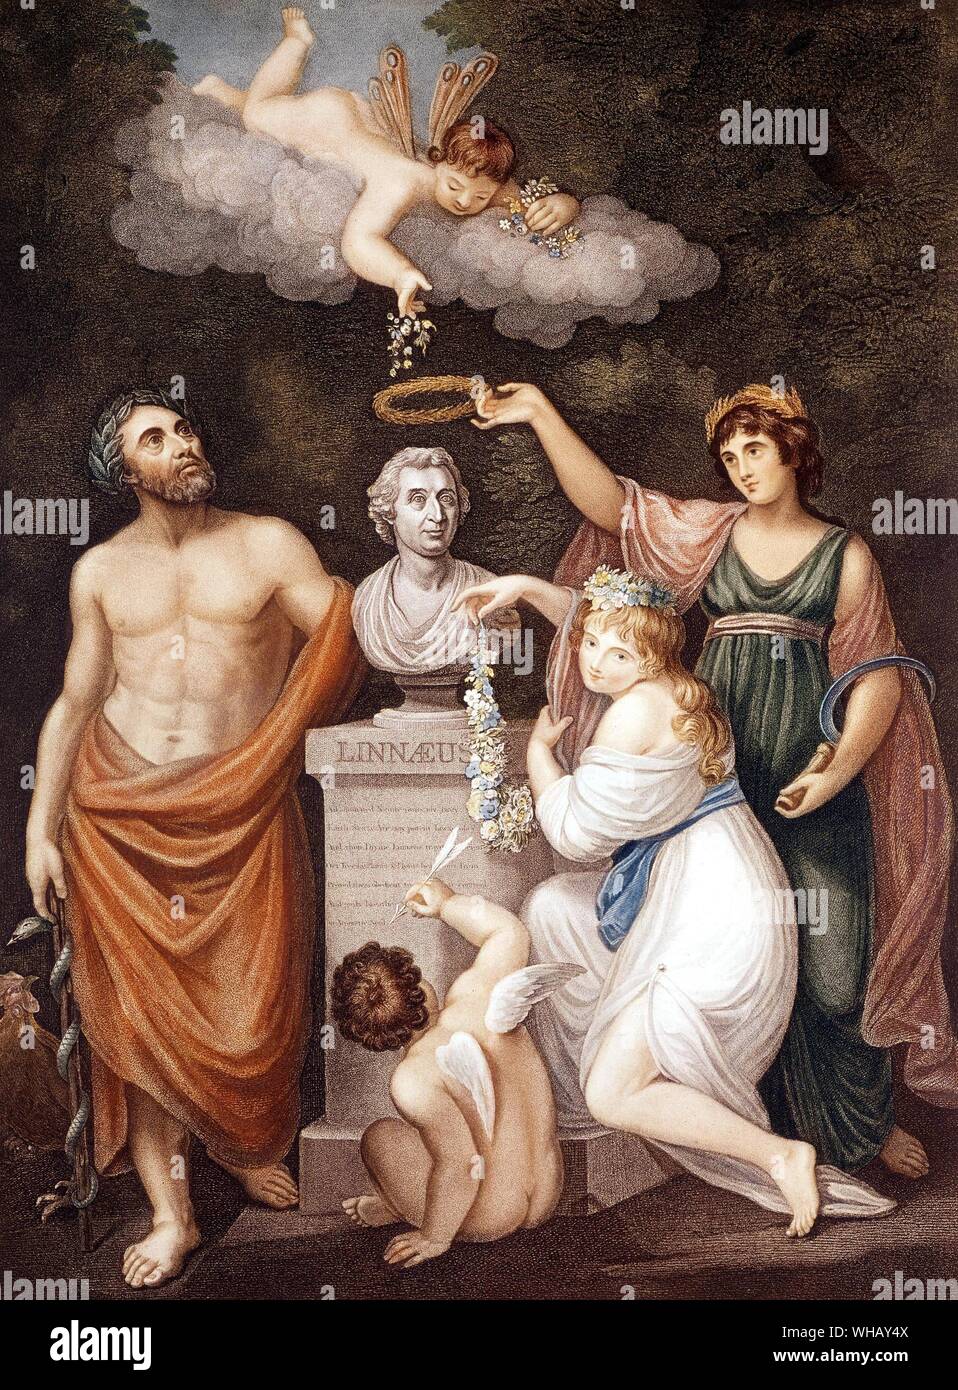 Temple of Flora by Dr. Robert John Thornton (1768-1837). Aesculapius Flora Ceres and Cupid, honouring the bust of Linnaeus. Stock Photo